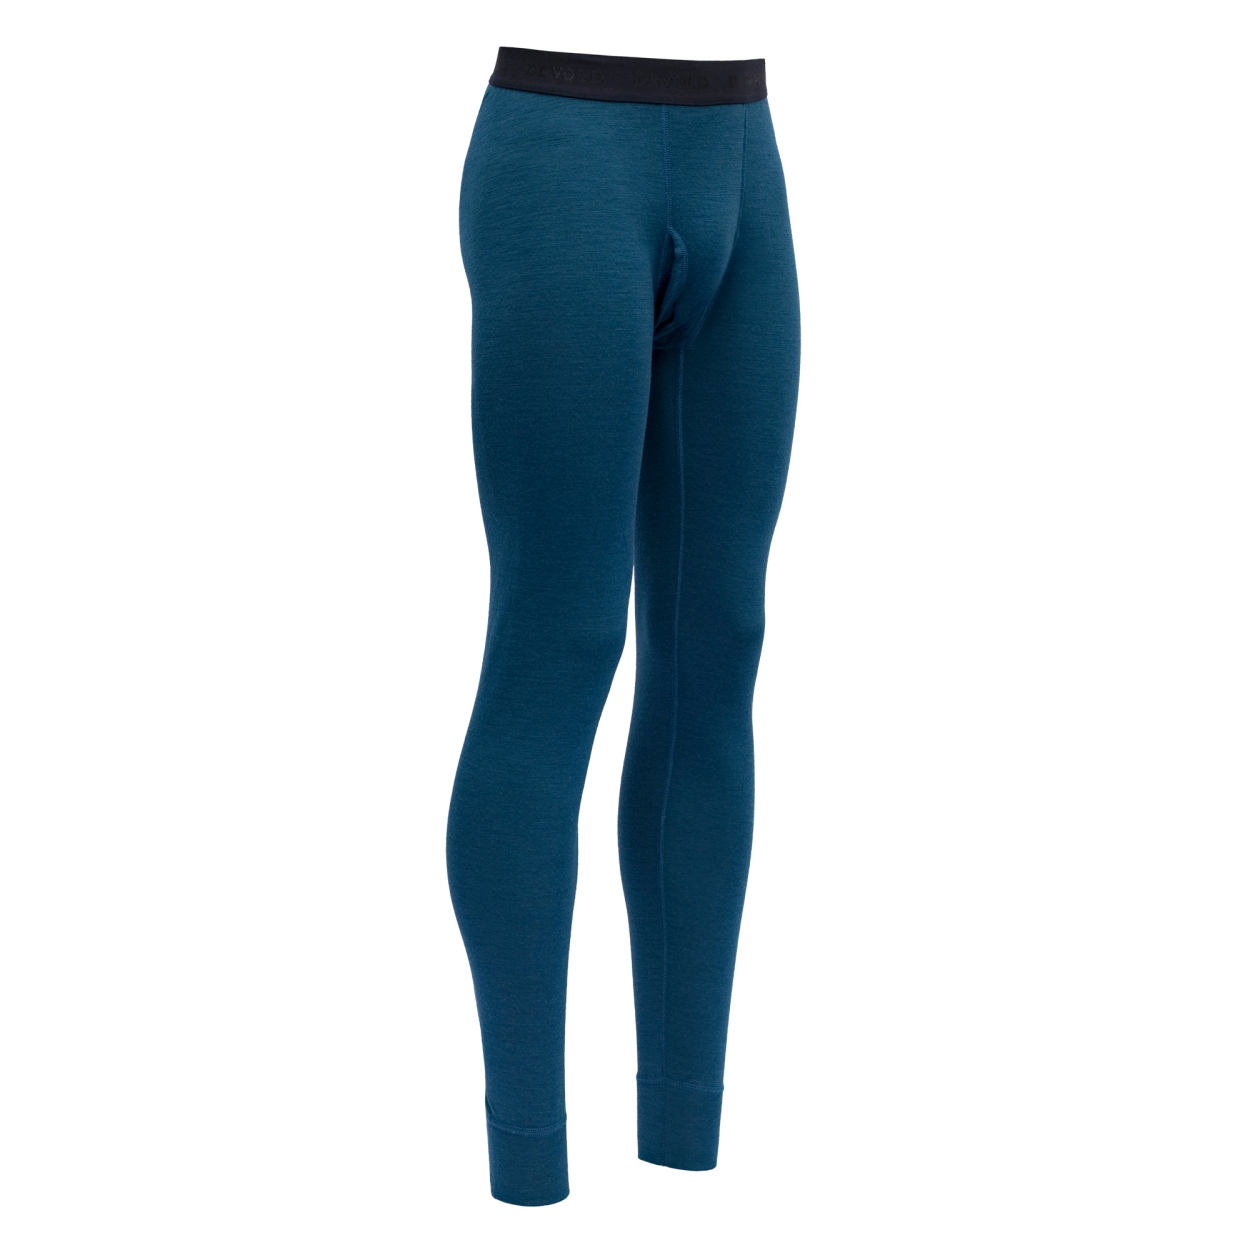 Duo Active Man Long Johns W/Fly, flood